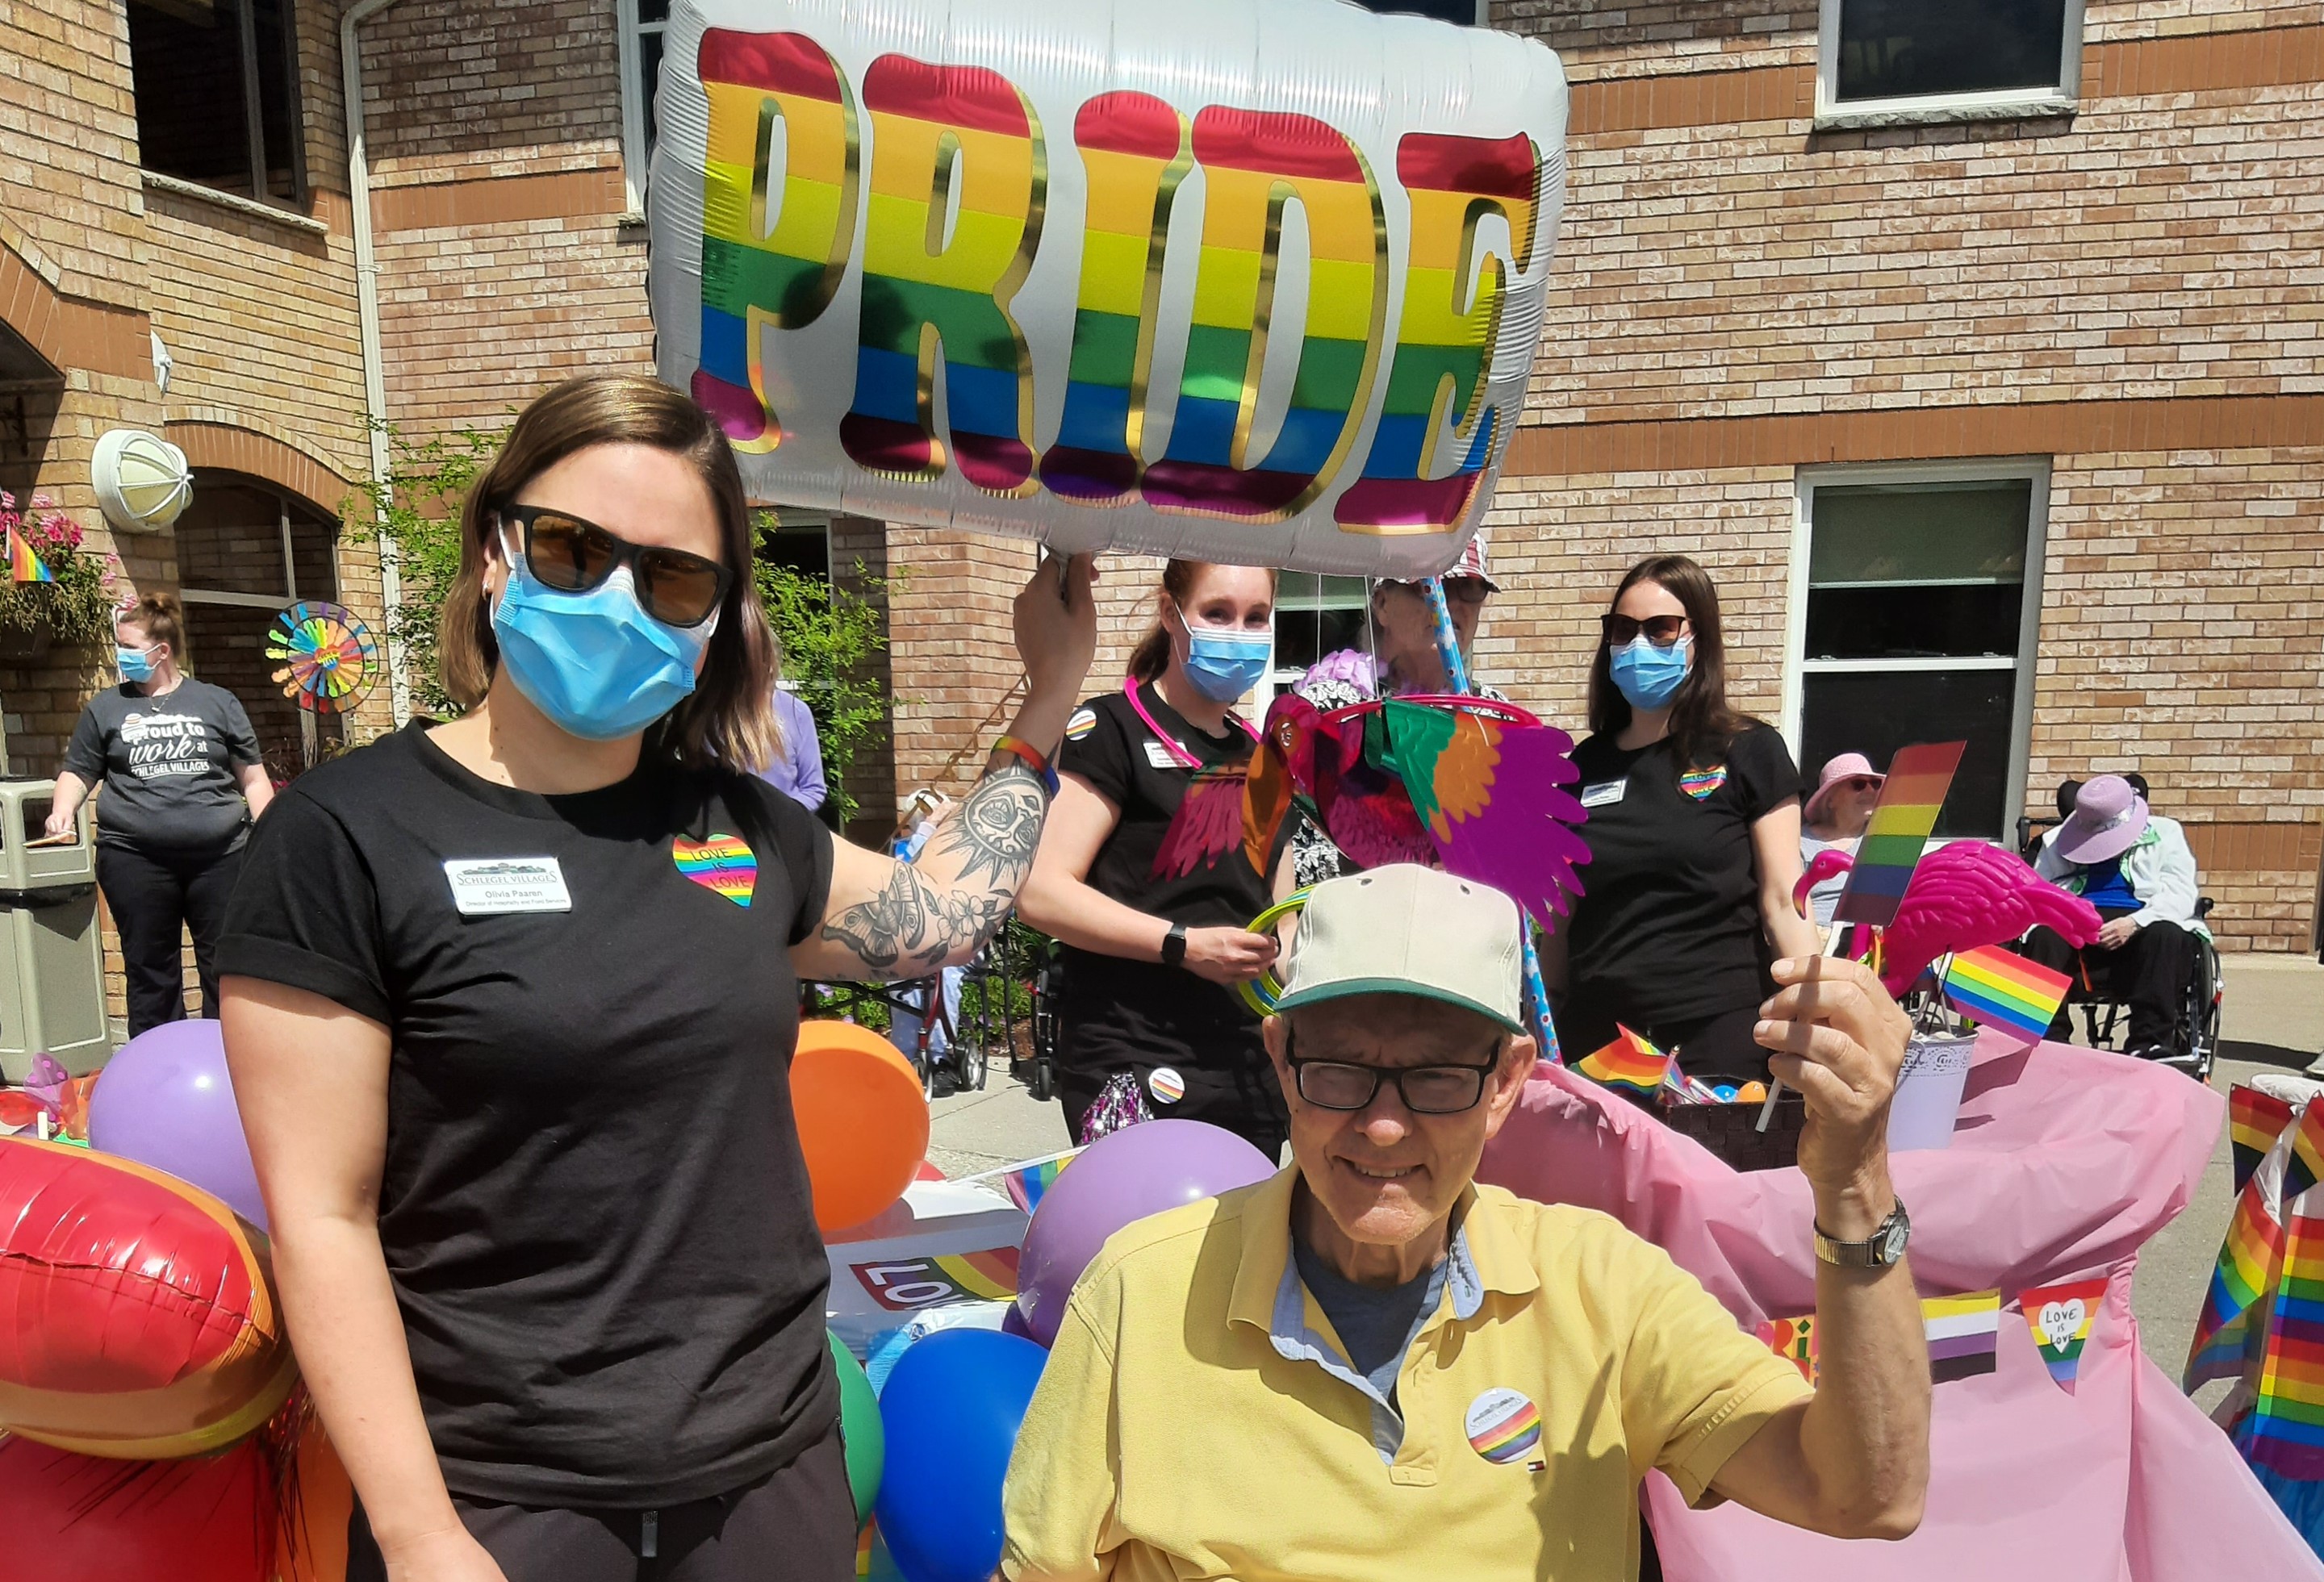 Gary was among the early pioneers in the movement towards a more inclusive society, and he was happy to be part of the Pride events and education in the Village of Riverside Glen. 